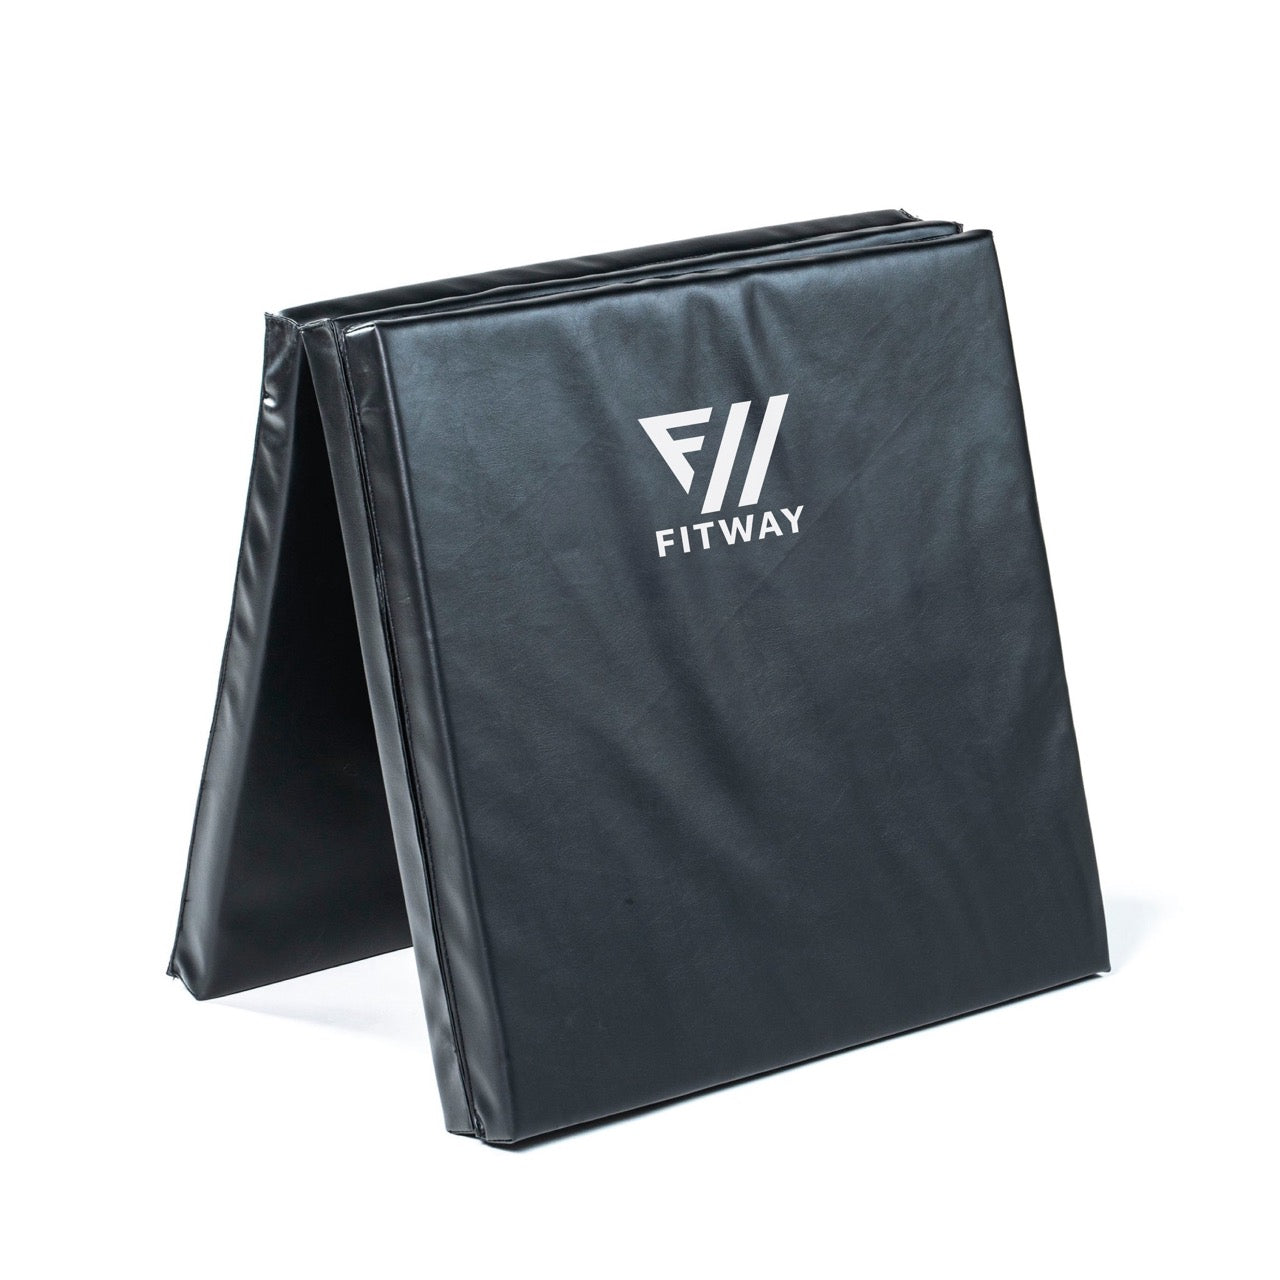 FitWay Equip. Folding Exercise Mat - 71" x 24"